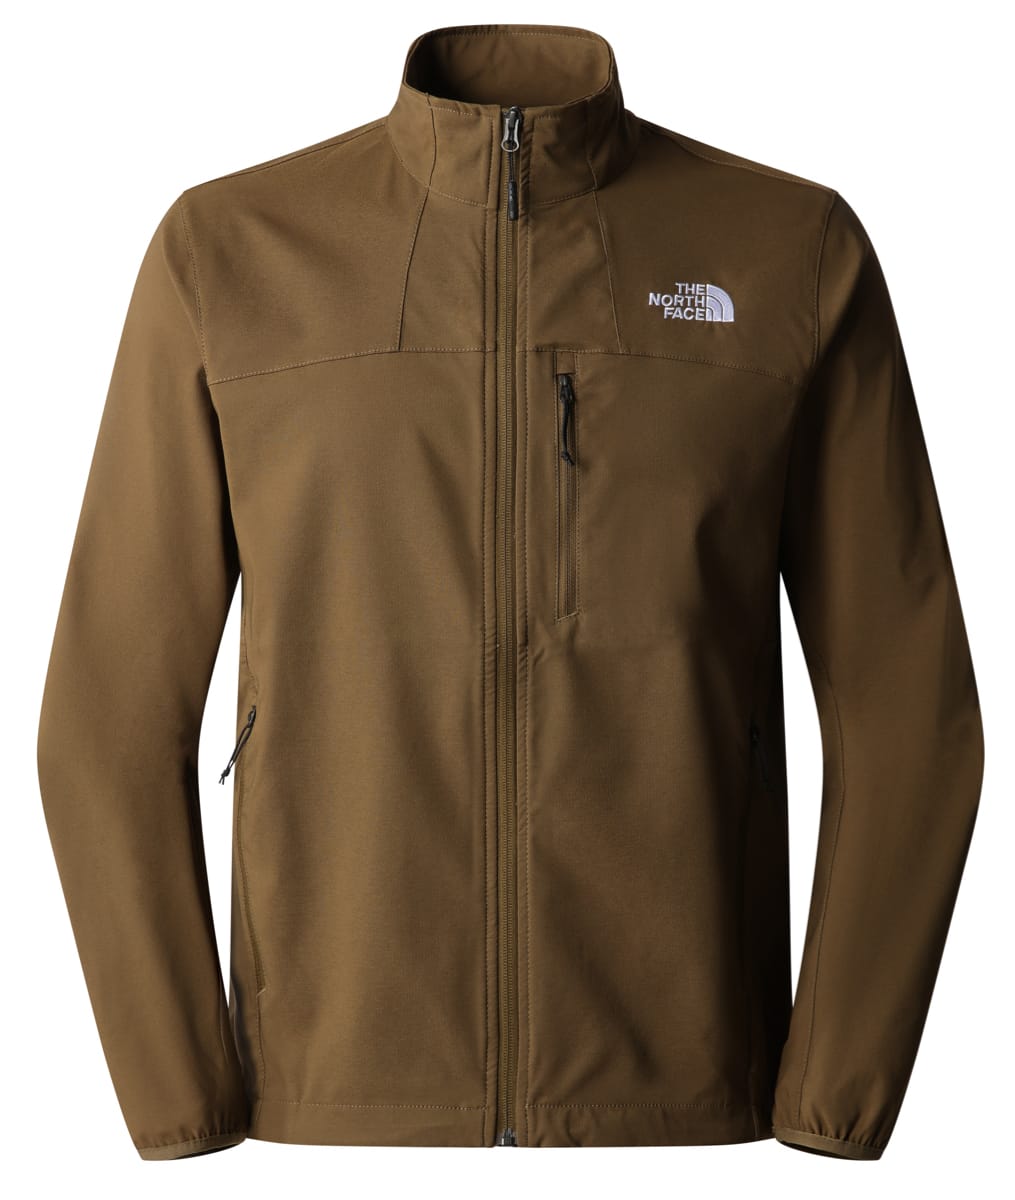 The North Face M Nimble Jacket - Military Olive